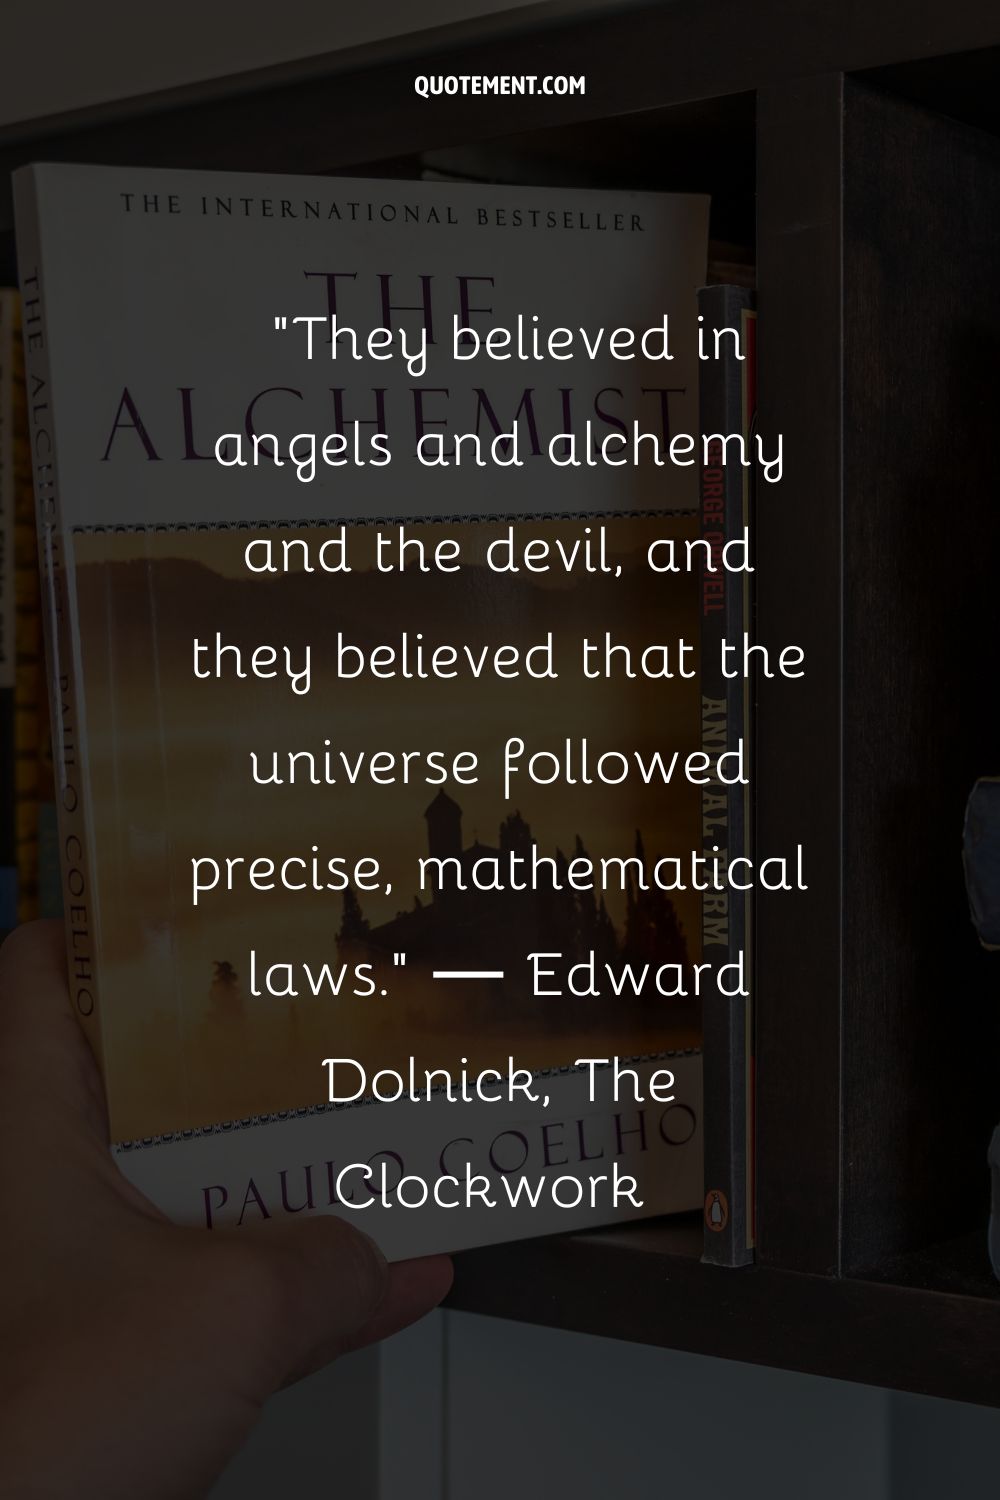 They believed in angels and alchemy and the devil, and they believed that the universe followed precise, mathematical laws